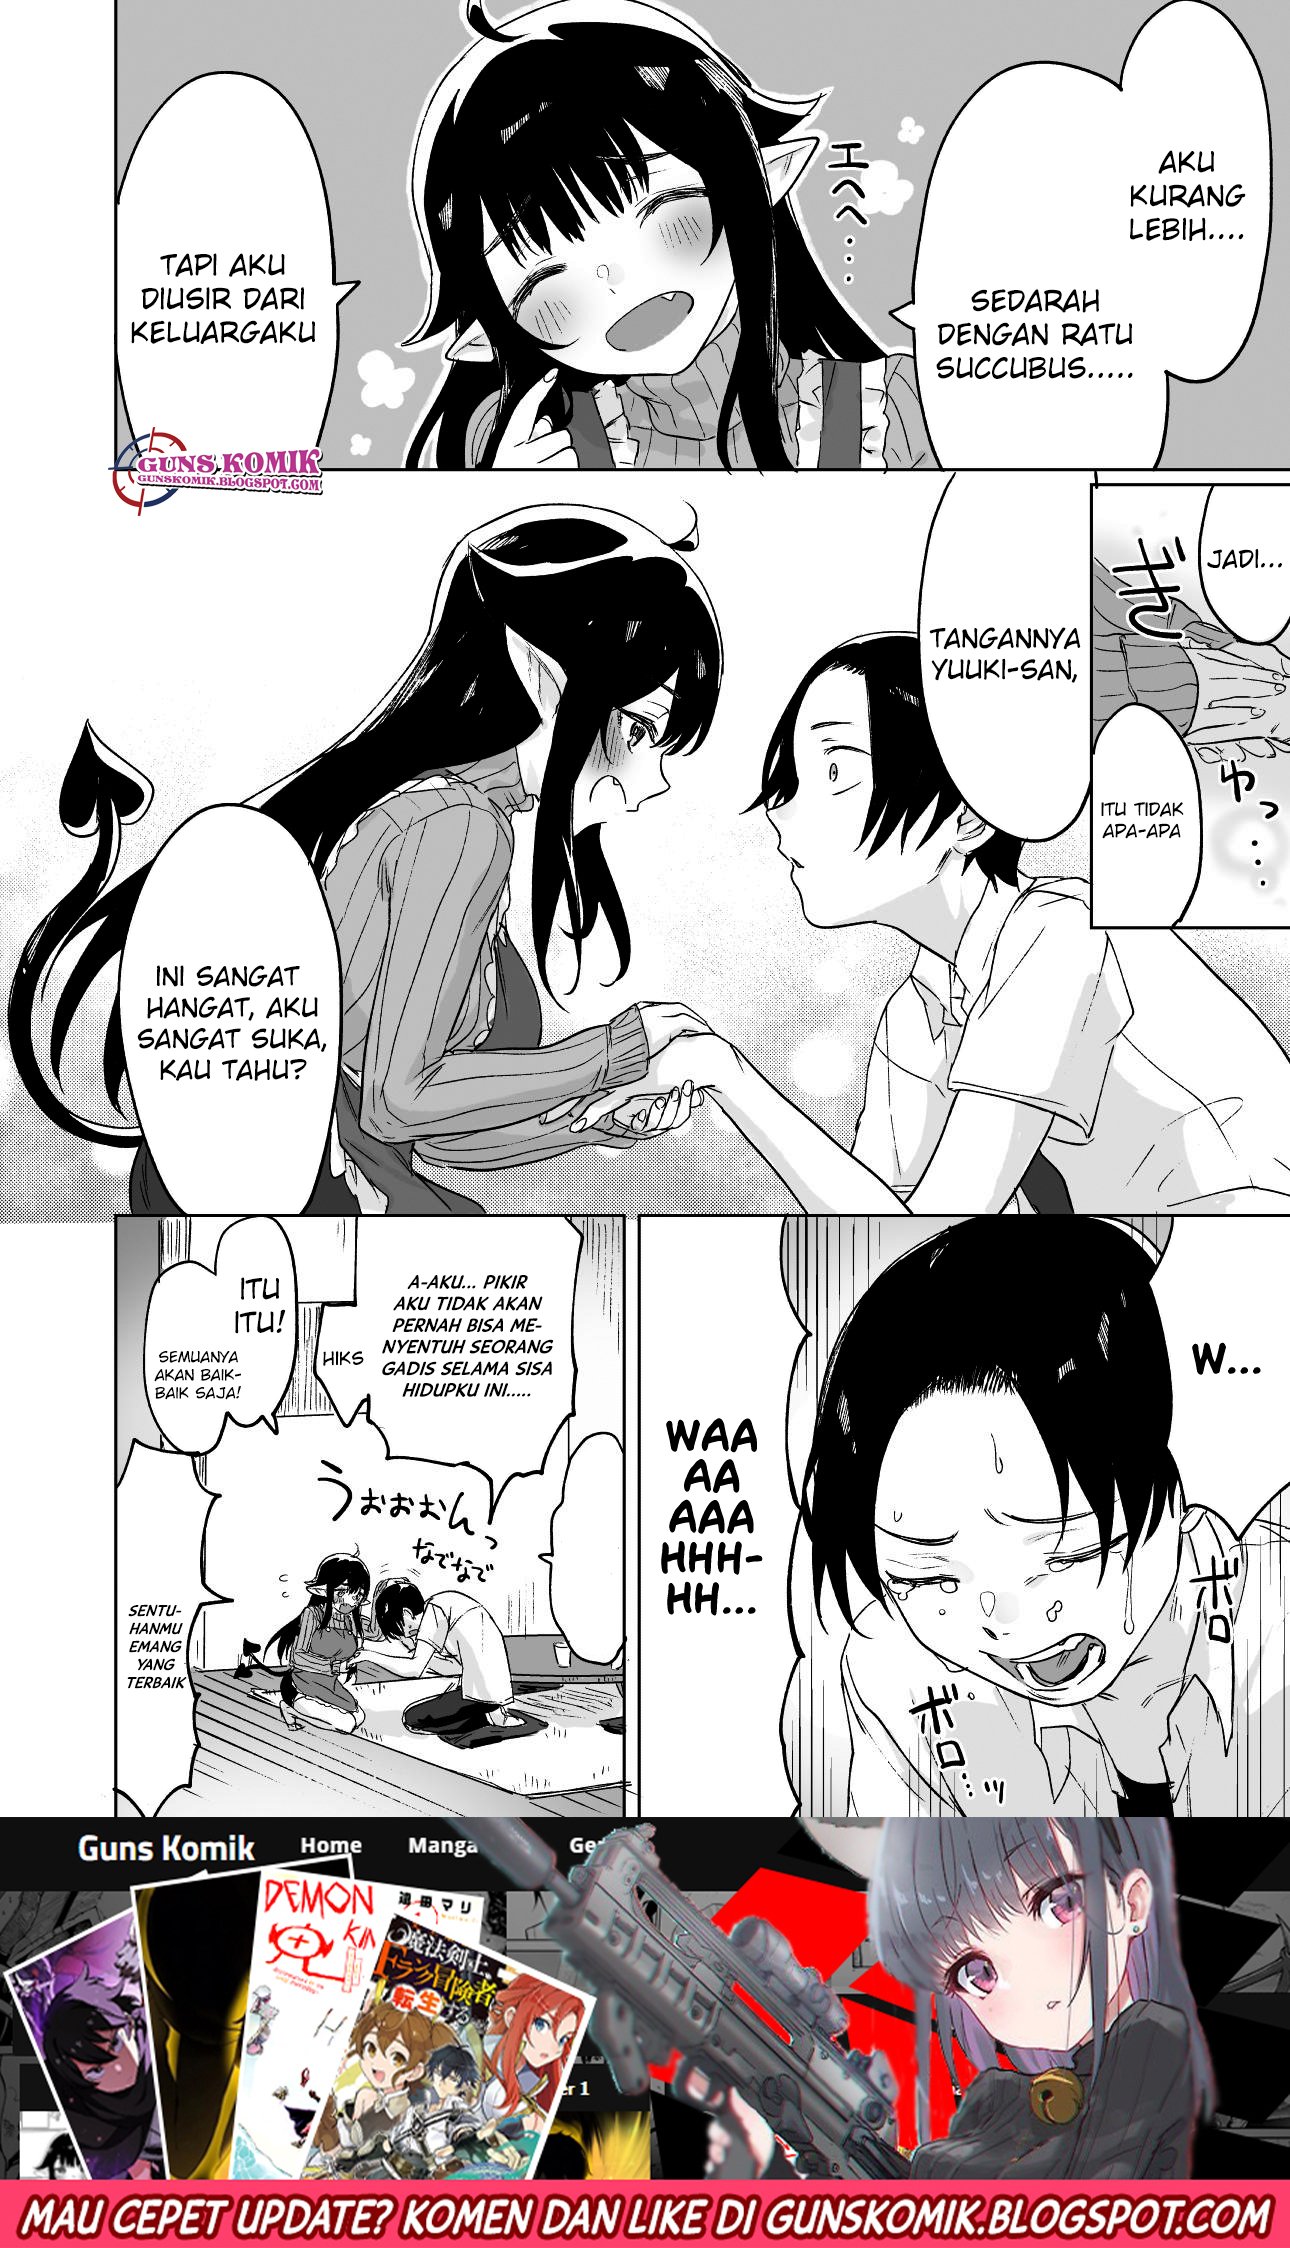 I Brought Home a Succubus who Failed to Find a Job Chapter 01.2